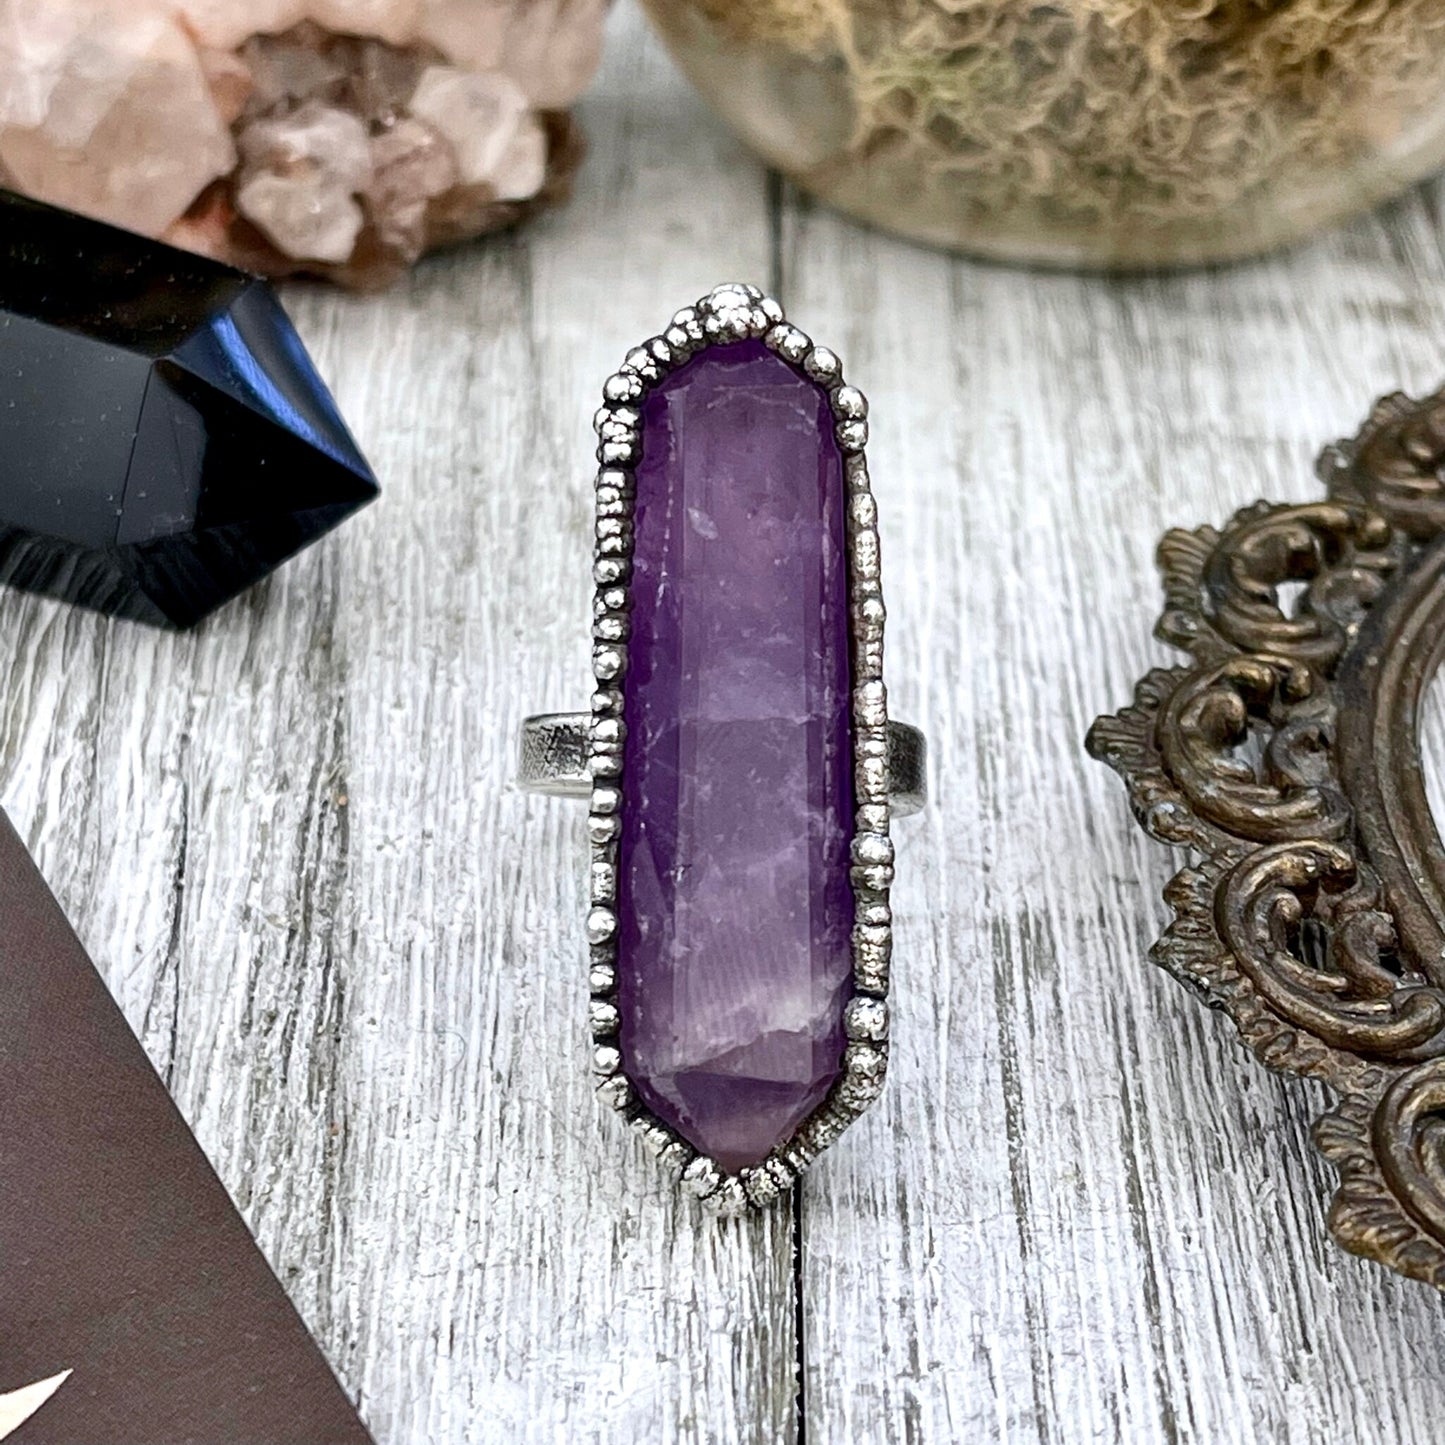 Purple Amethyst Crystal Point Ring Set in Fine Silver Size 8 - 9 / Foxlark Collection - One of a Kind